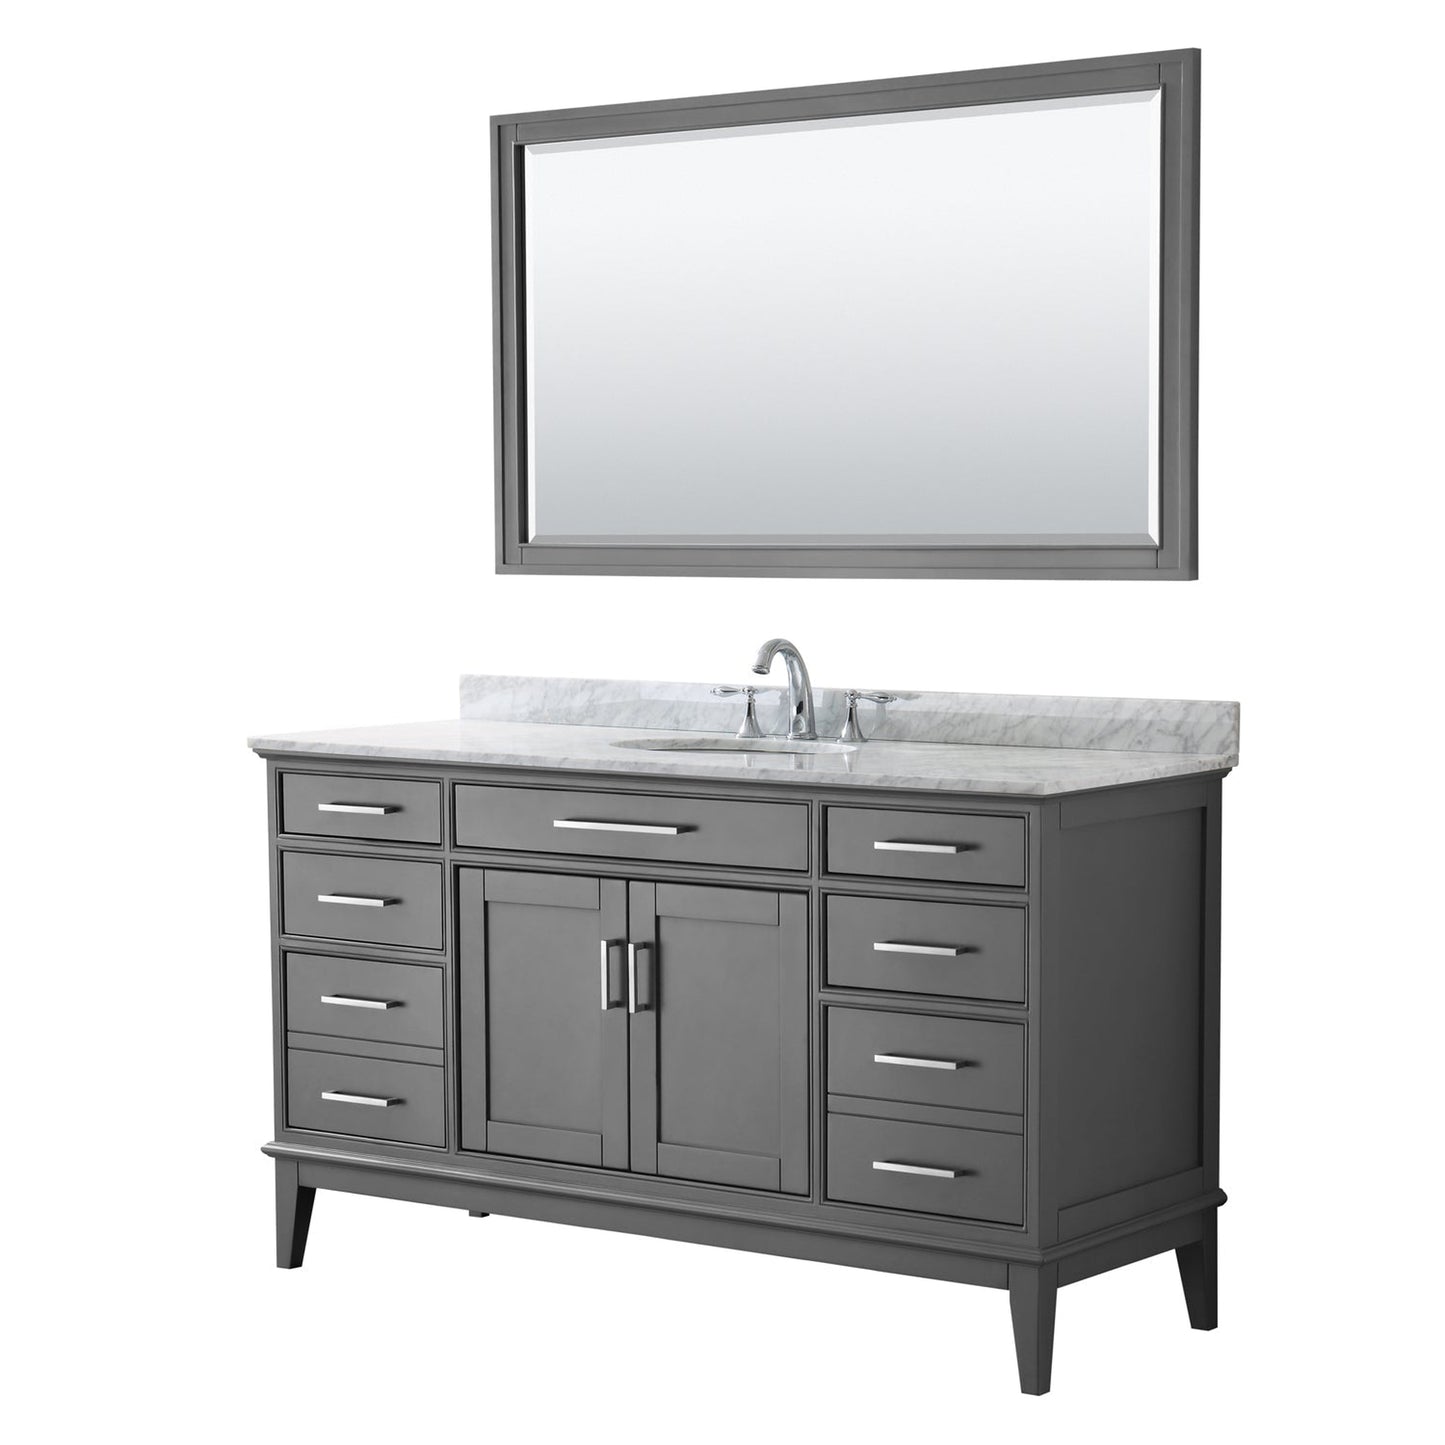 Wyndham Collection Margate 60" Single Bathroom Dark Gray Vanity With White Carrara Marble Countertop, Undermount Oval Sink And 56" Mirror